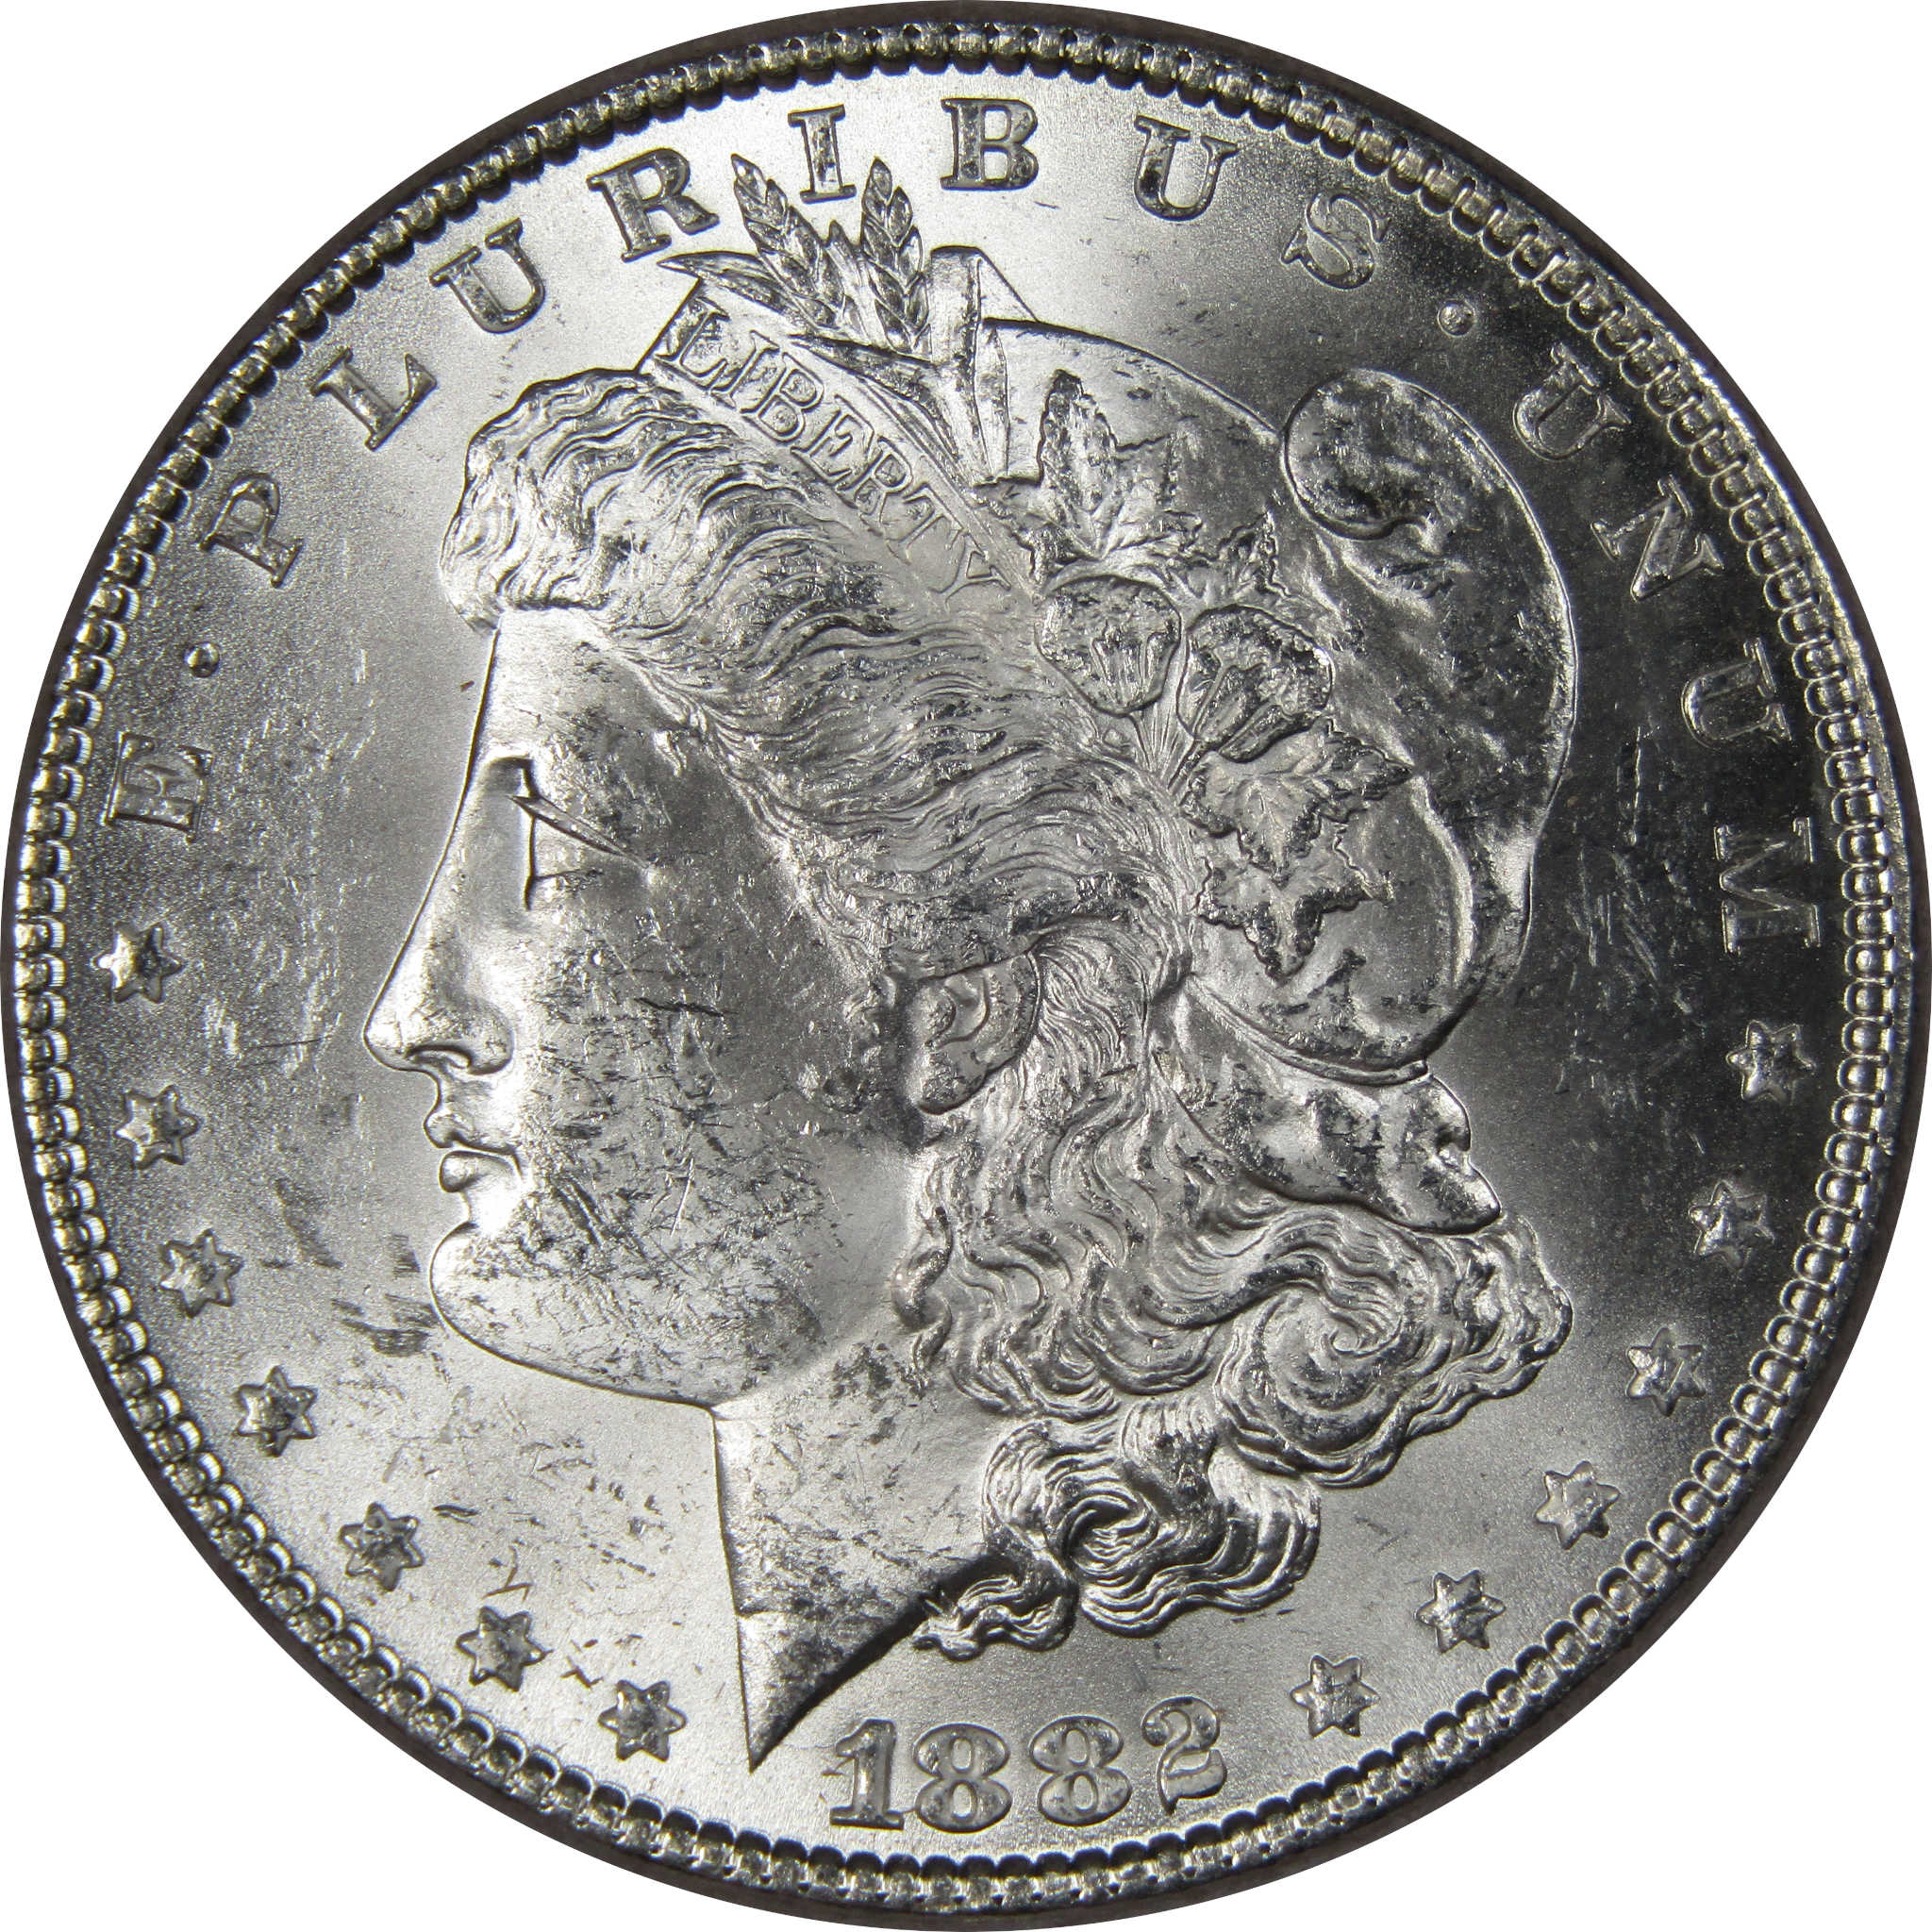 1882 Morgan Dollar BU Uncirculated Mint State 90% Silver SKU:IPC9677 - Morgan coin - Morgan silver dollar - Morgan silver dollar for sale - Profile Coins &amp; Collectibles